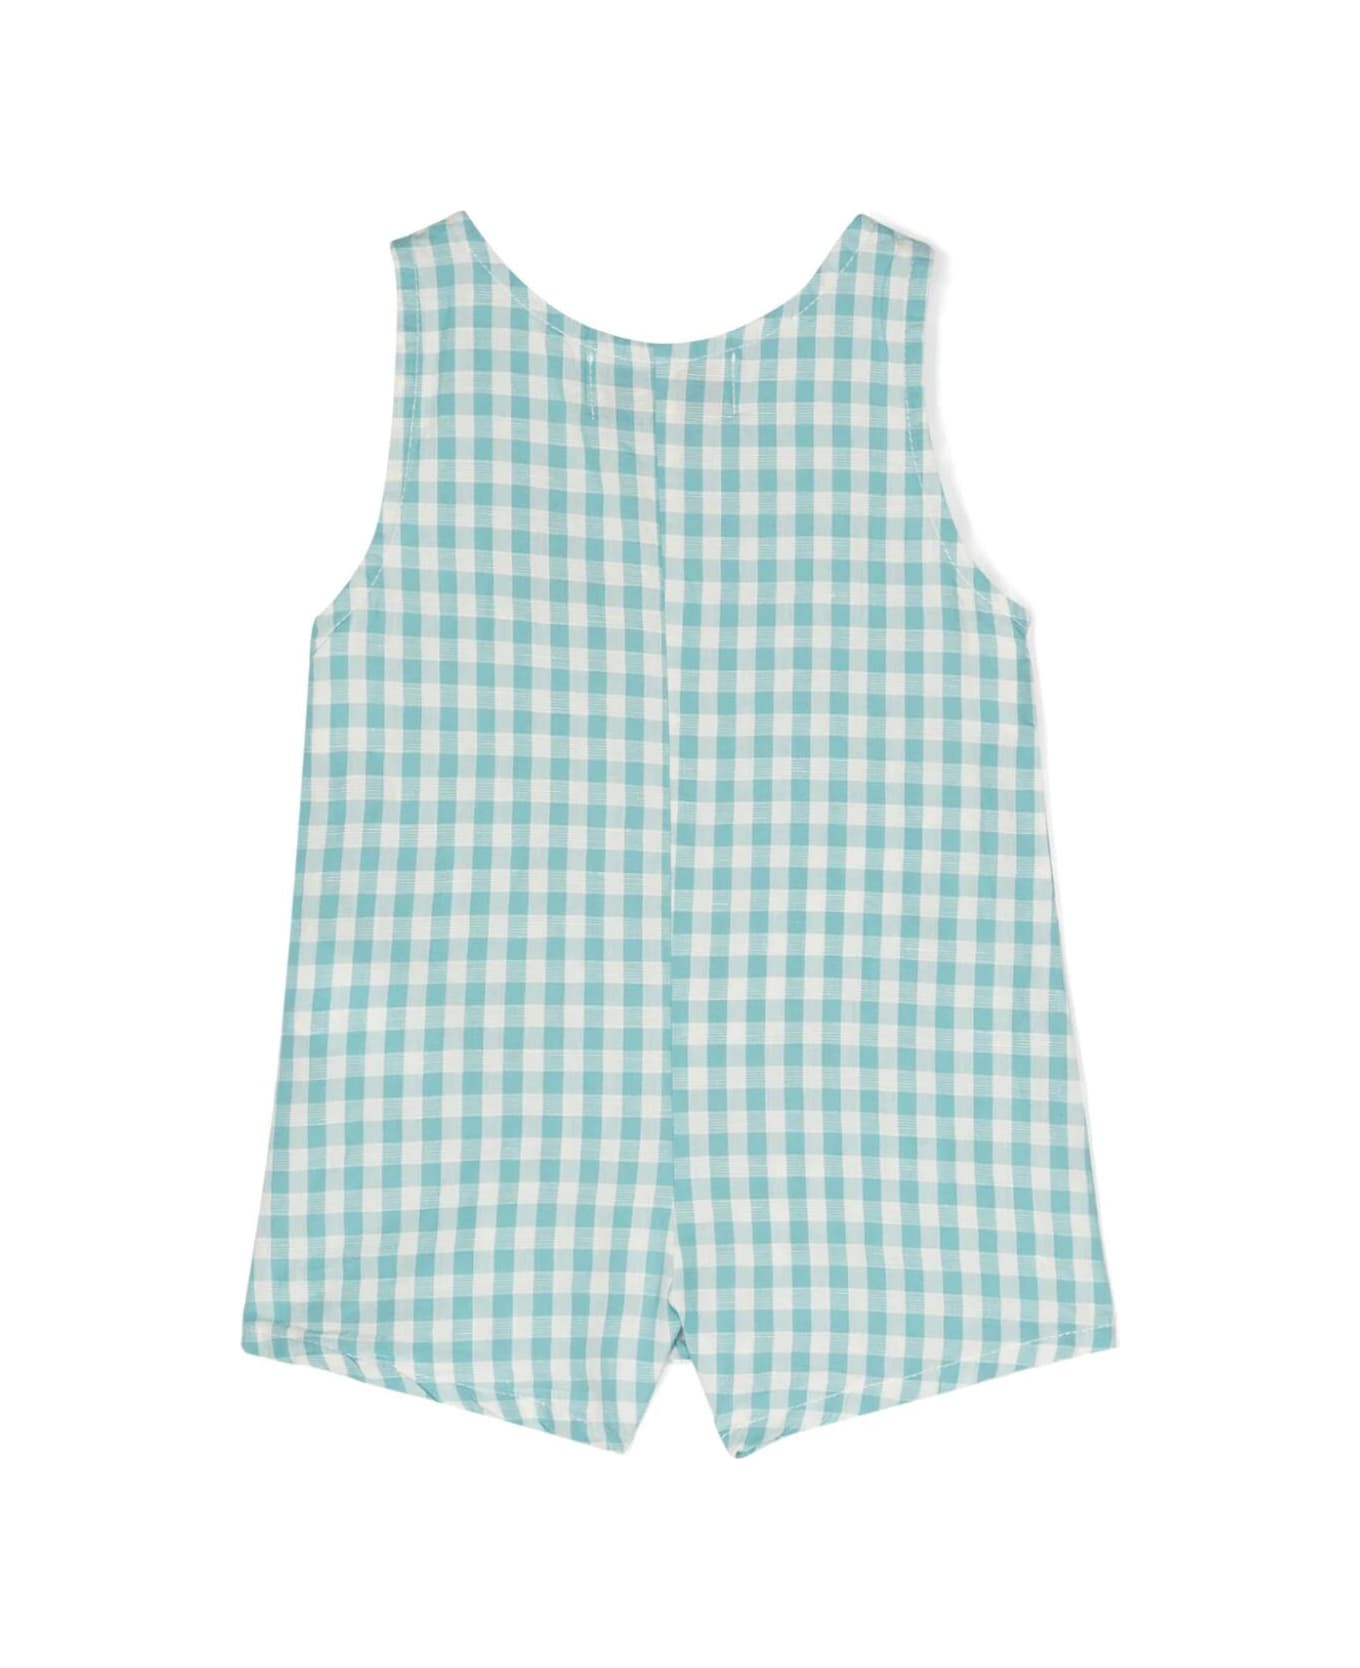 Bobo Choses Baby Ant Vichy Woven Playsuit - Turquoise